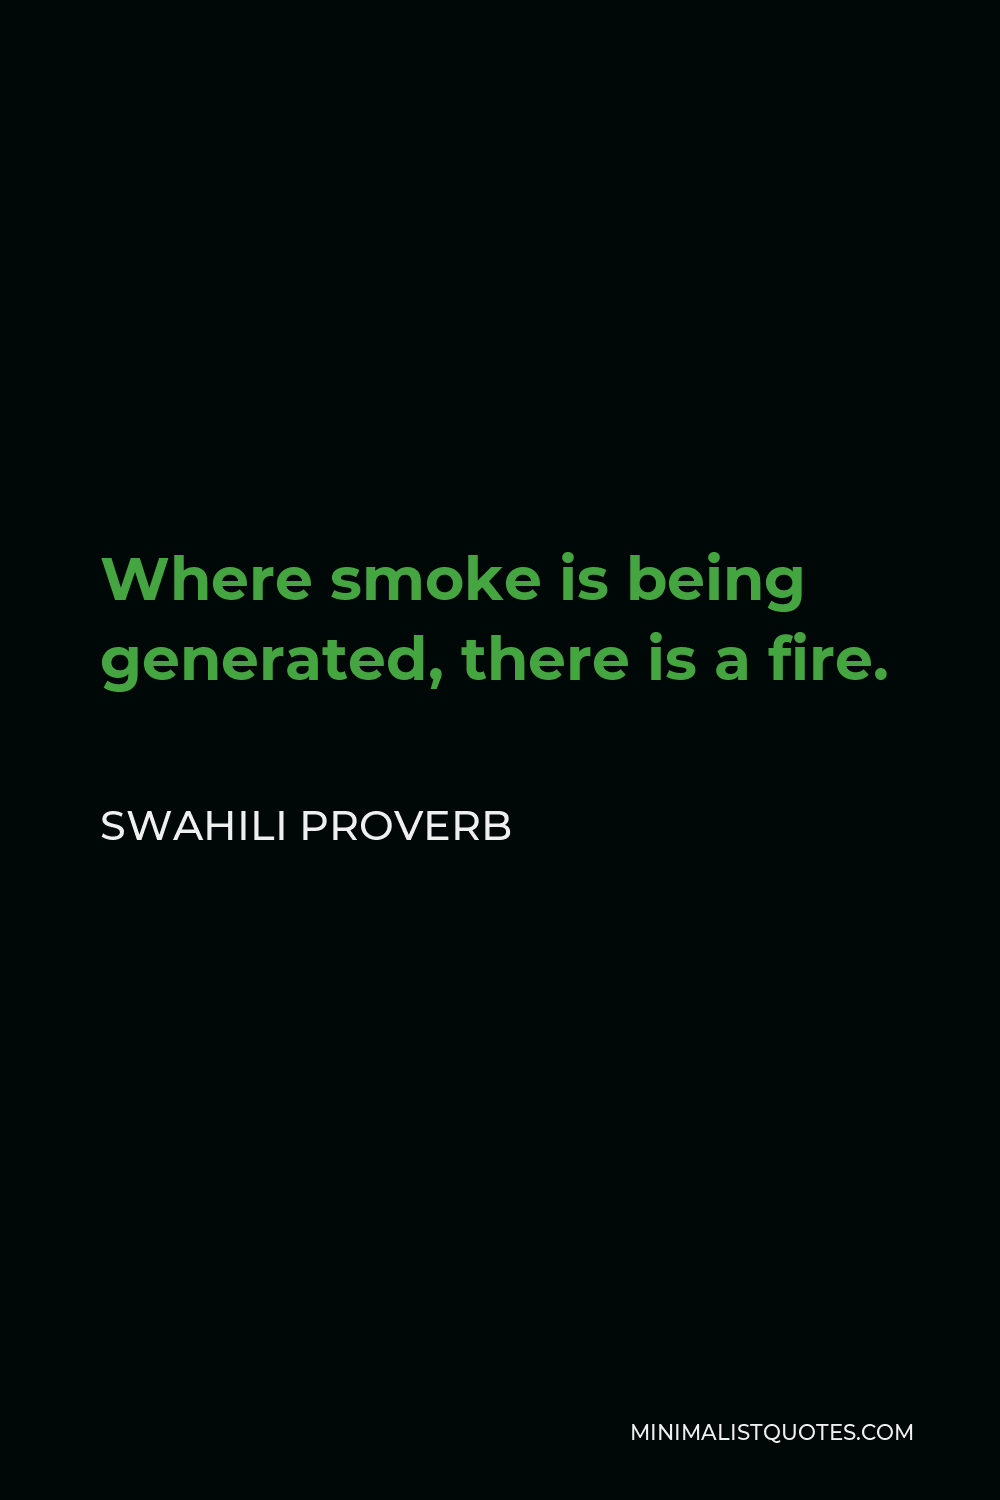 Swahili Proverb Quote - Where smoke is being generated, there is a fire.